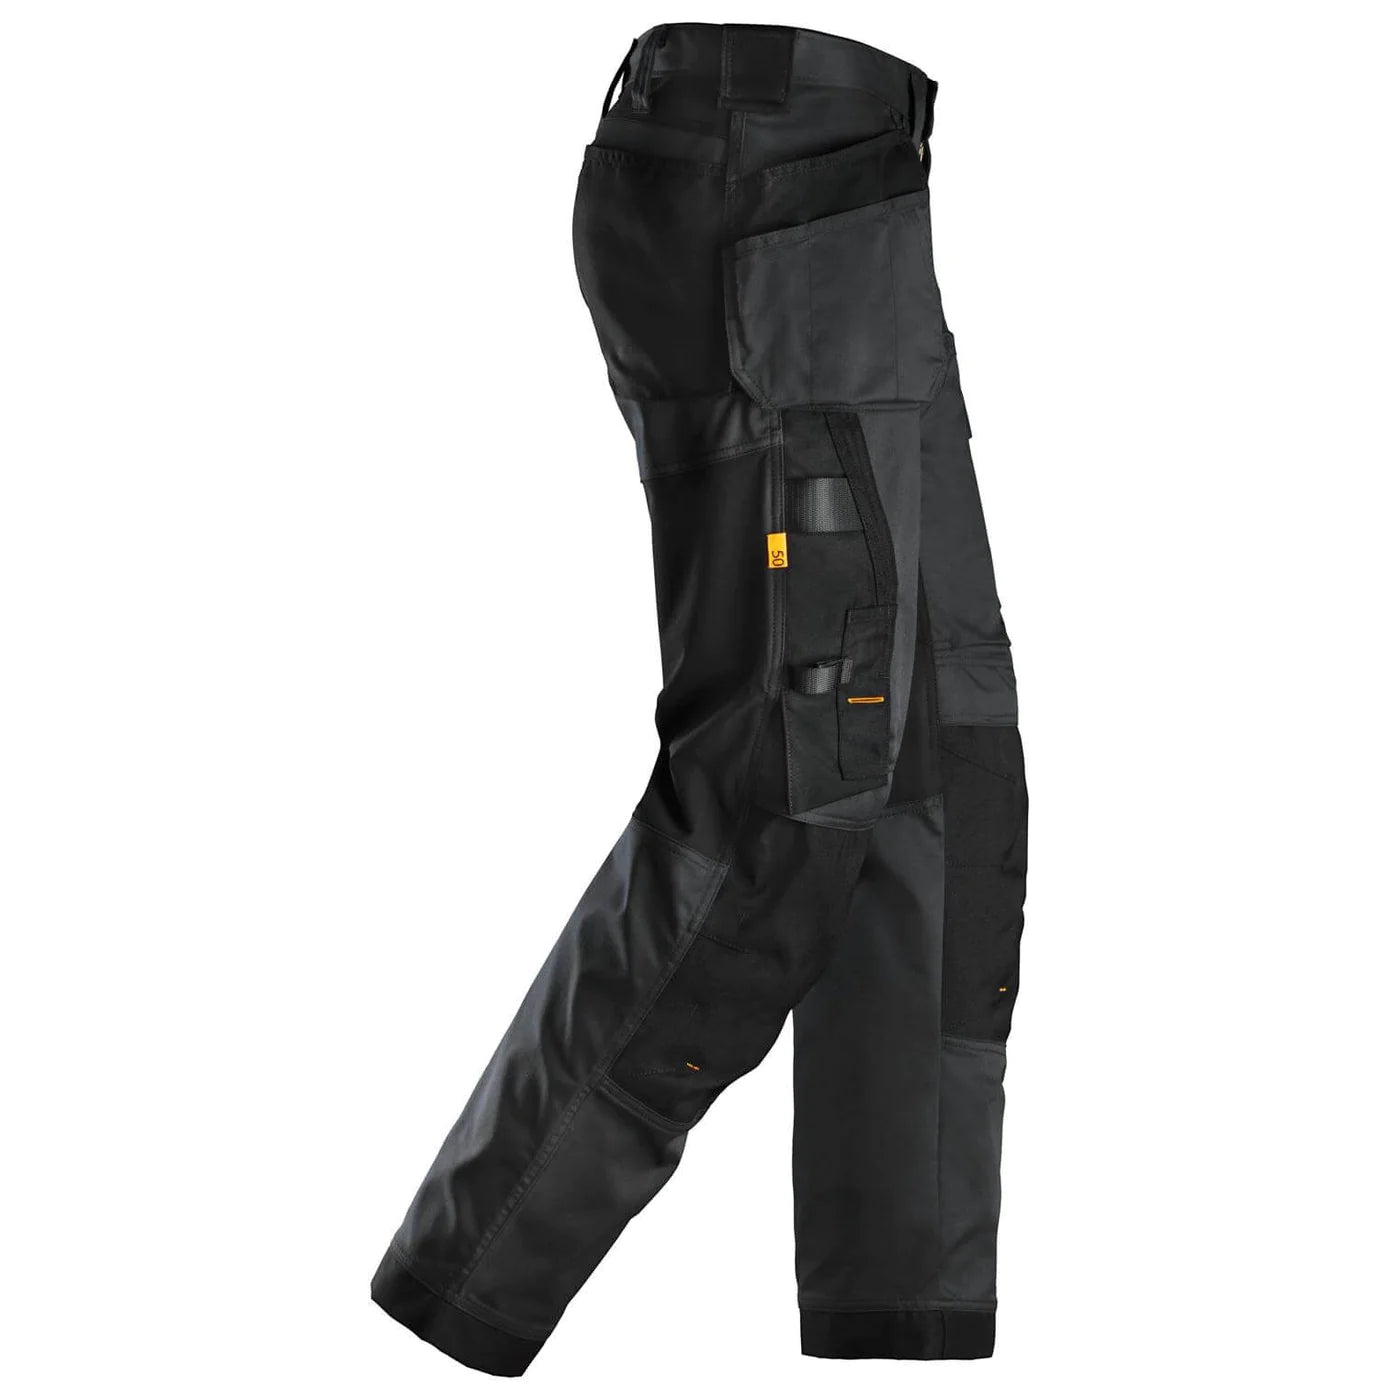 Snickers 6251 Allroundwork Stretch Loose Fit Work Trousers With Holster Pockets Black